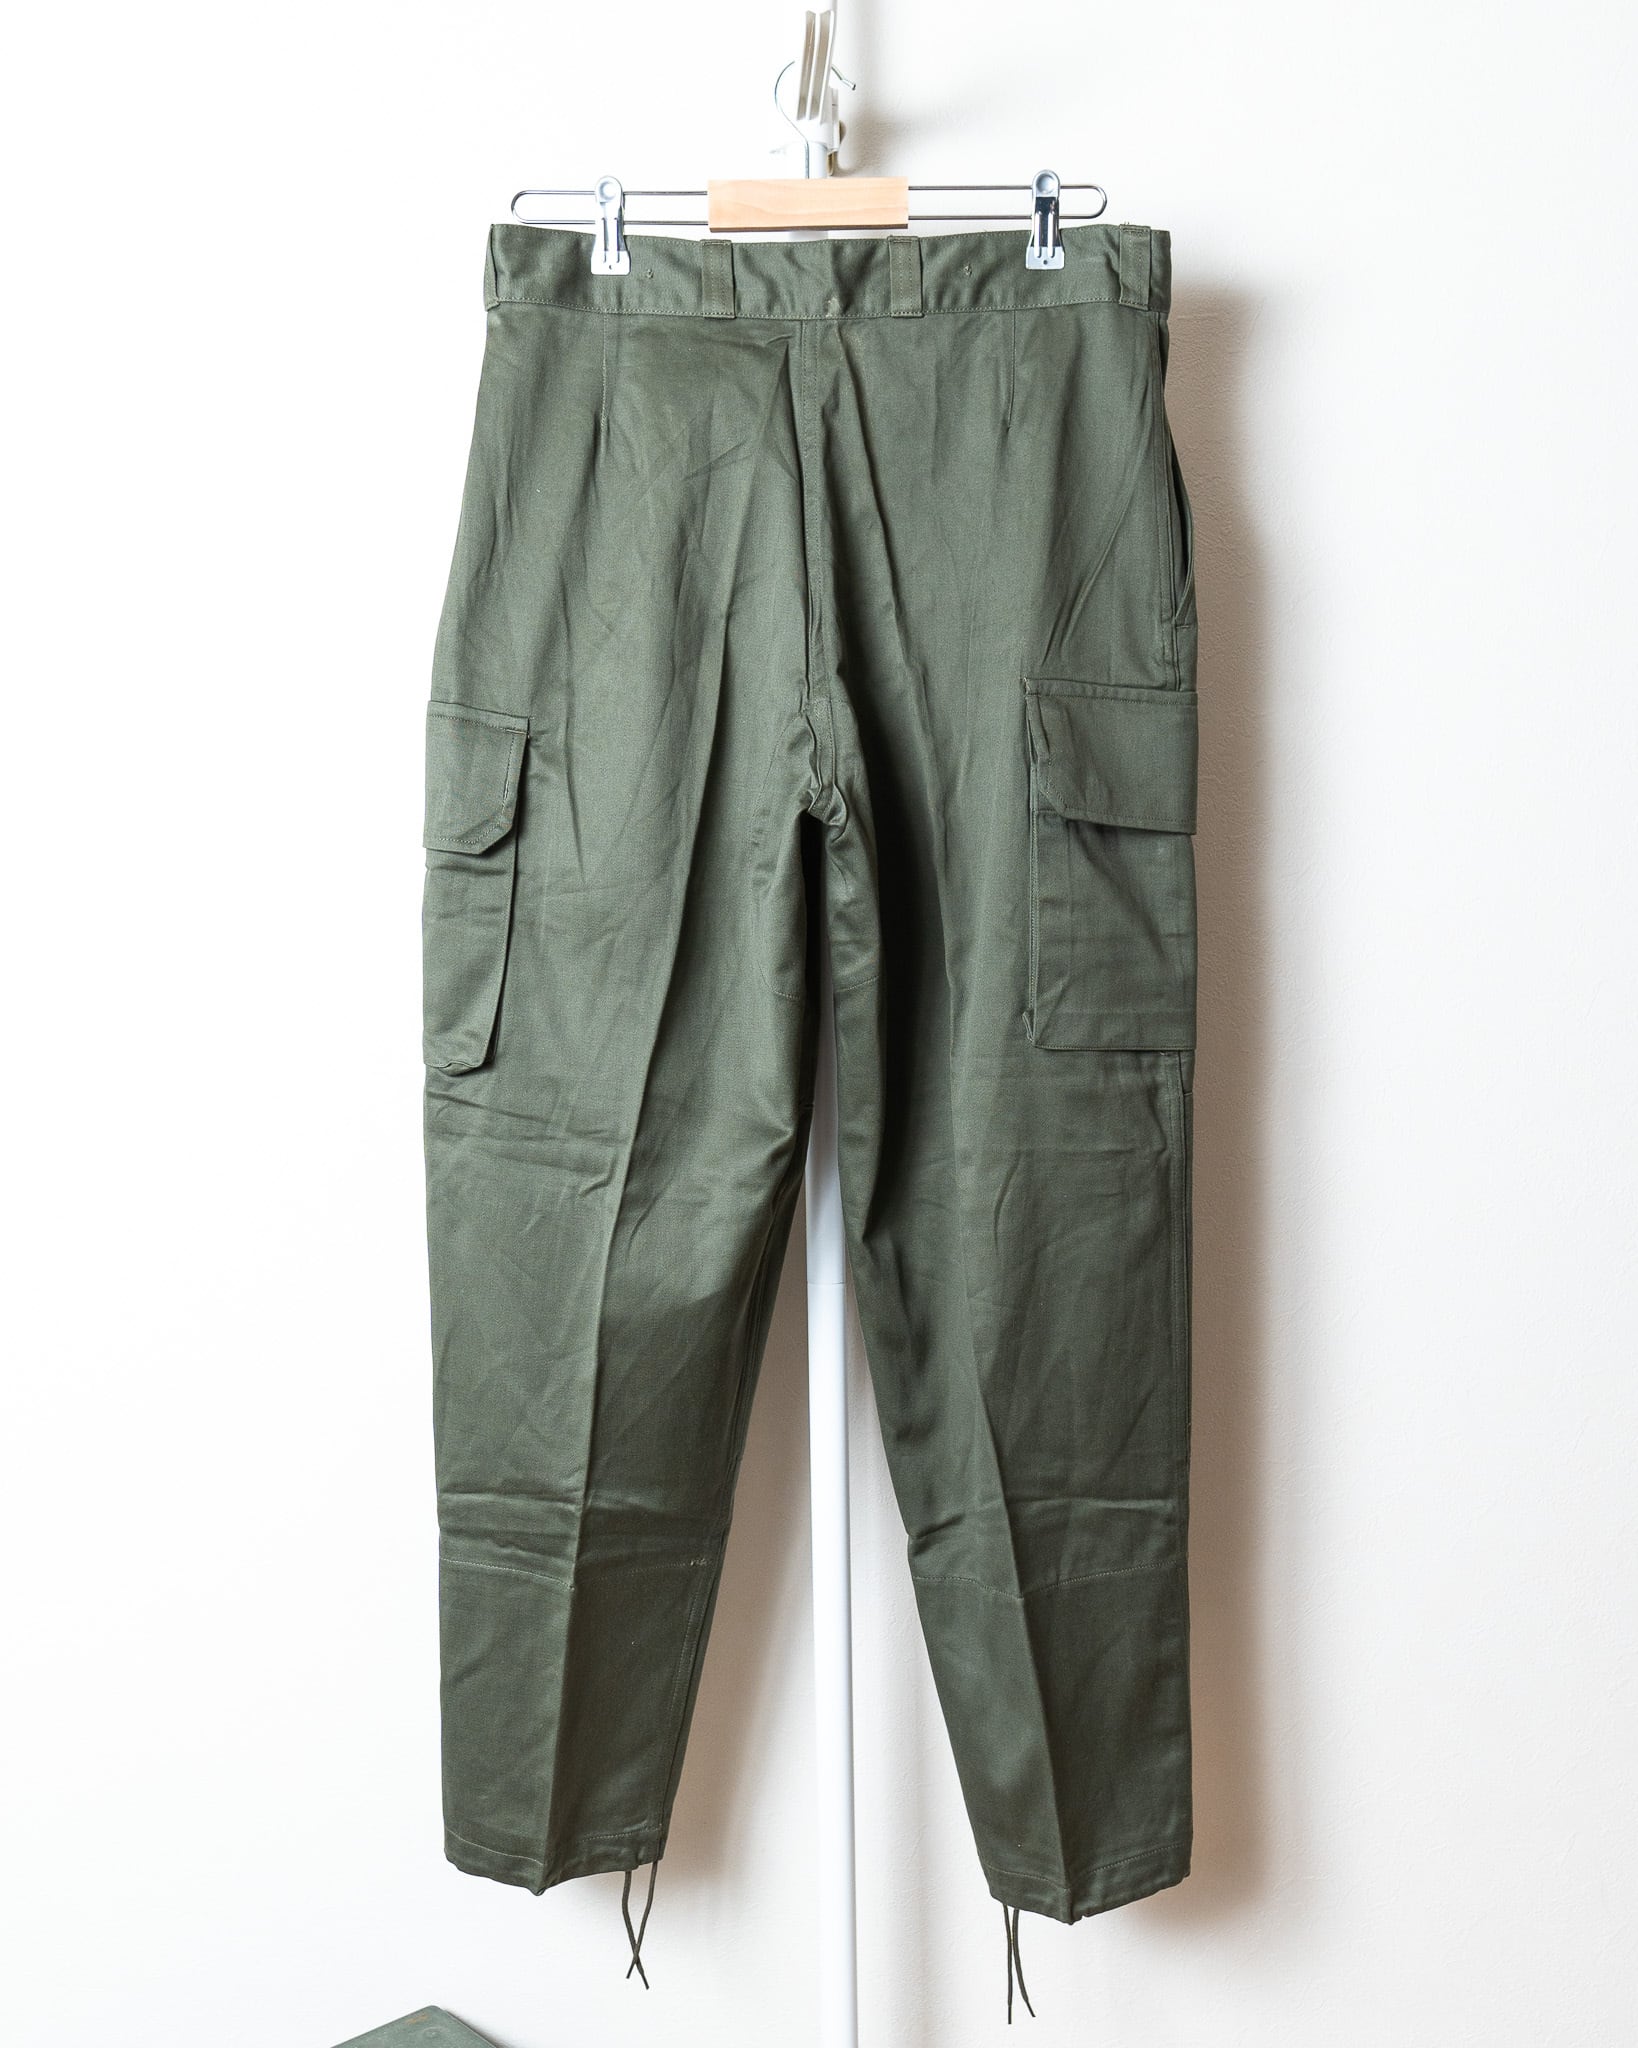 DEADSTOCK】French Army M-64 Field Trousers デッドストック フランス